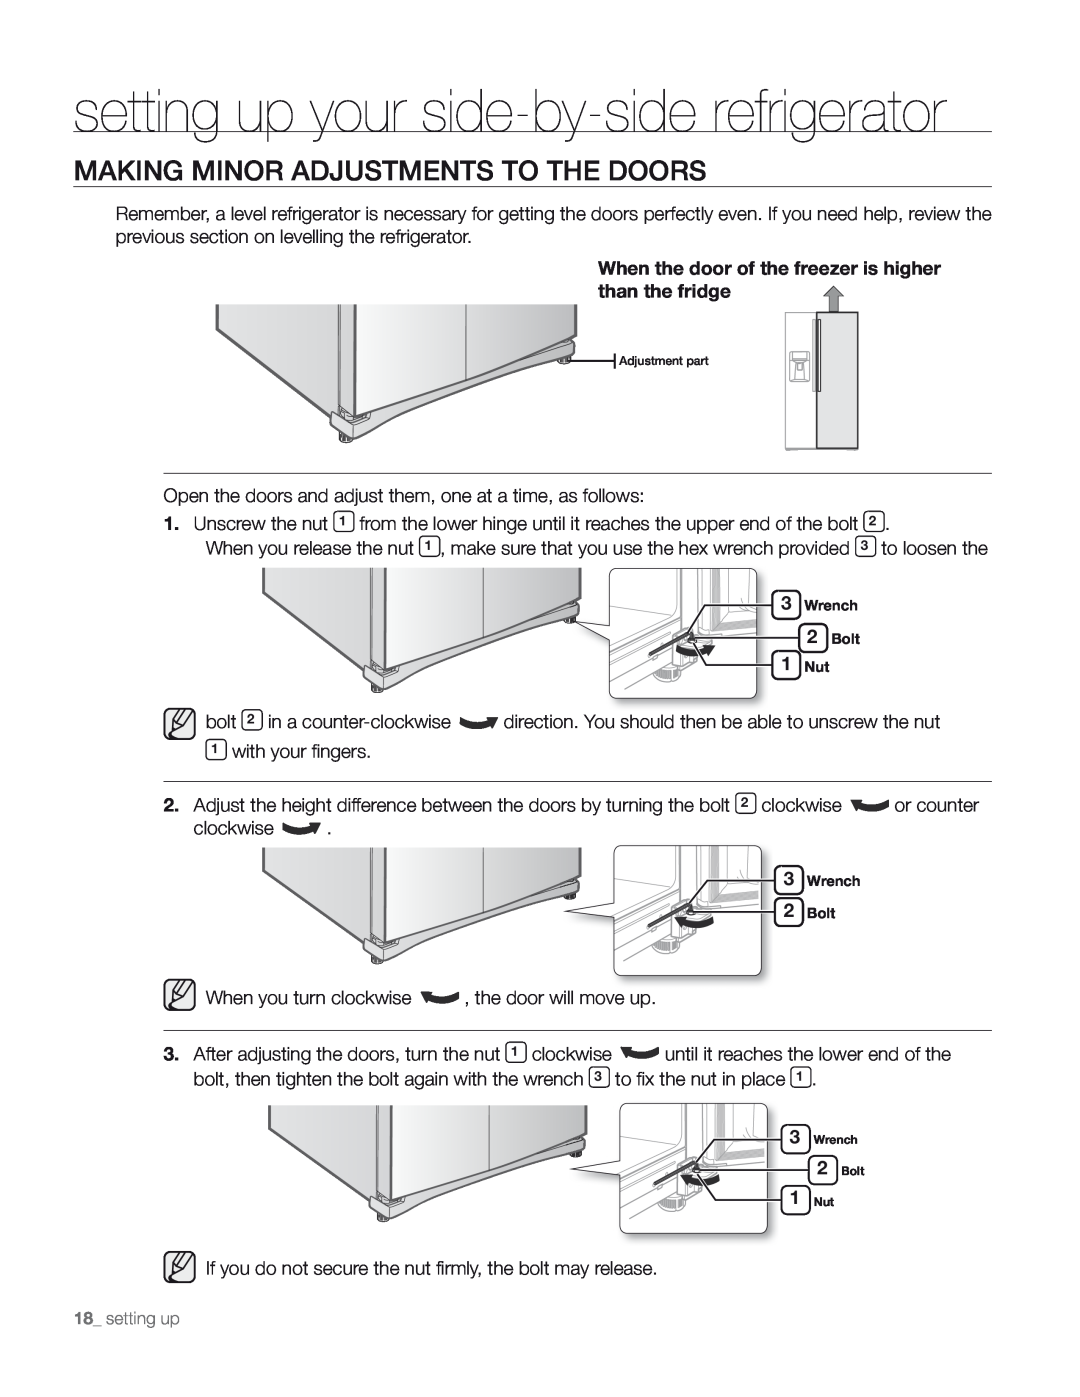 Samsung DA68-01890M user manual Making Minor Adjustments To The Doors, setting up your side-by-side refrigerator 